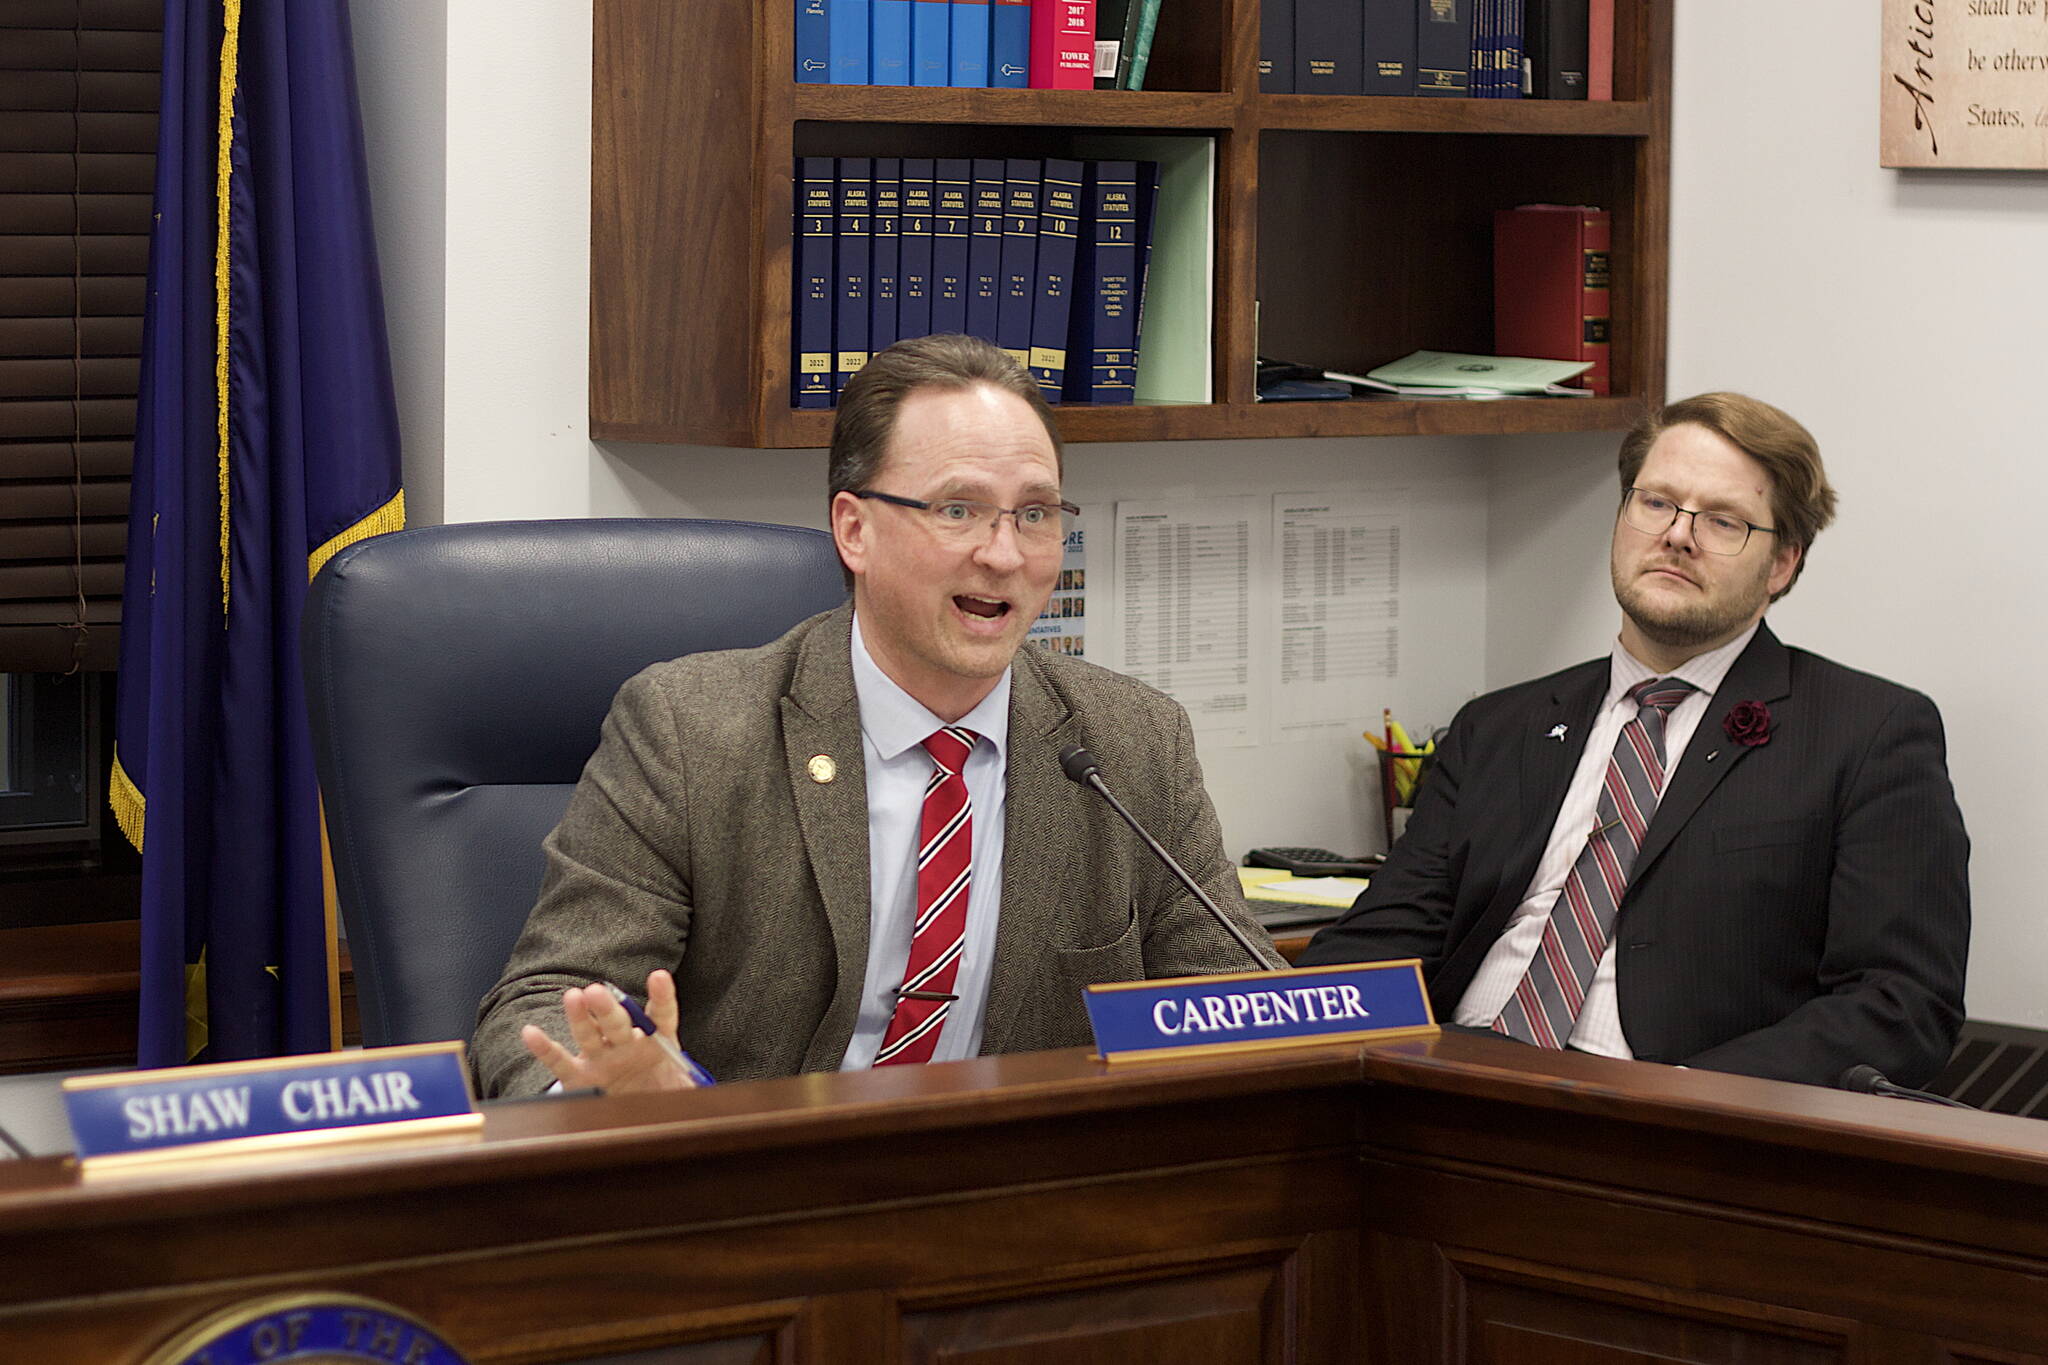 State Rep. Ben Carpenter, R-Nikiski, inquires about election legislation during a committee hearing Tuesday at the Alaska State Capitol. Carpenter, chair of the House Ways and Means Committee, is sponsoring bills to decrease business taxes and implement a 2% statewide sales tax that got hearings this week. (Mark Sabbatini / Juneau Empire)